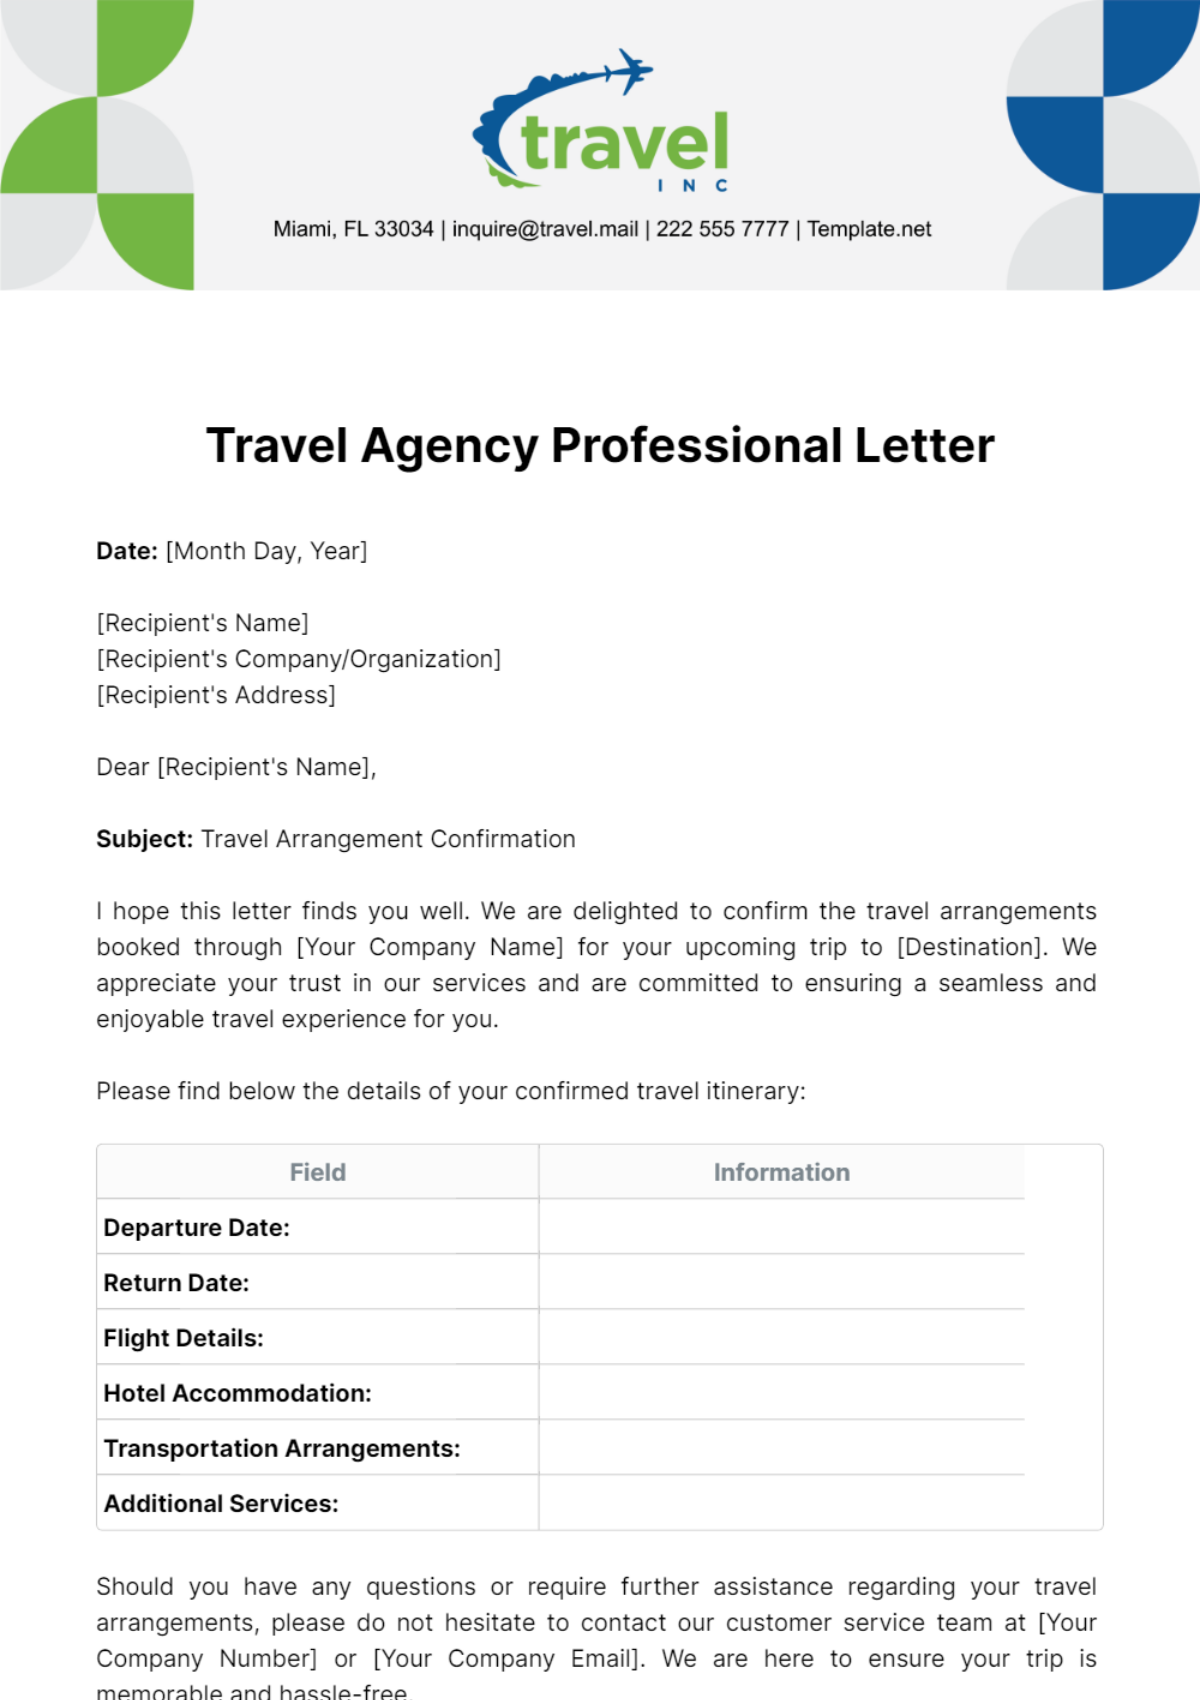 Travel Agency Professional Letter Template